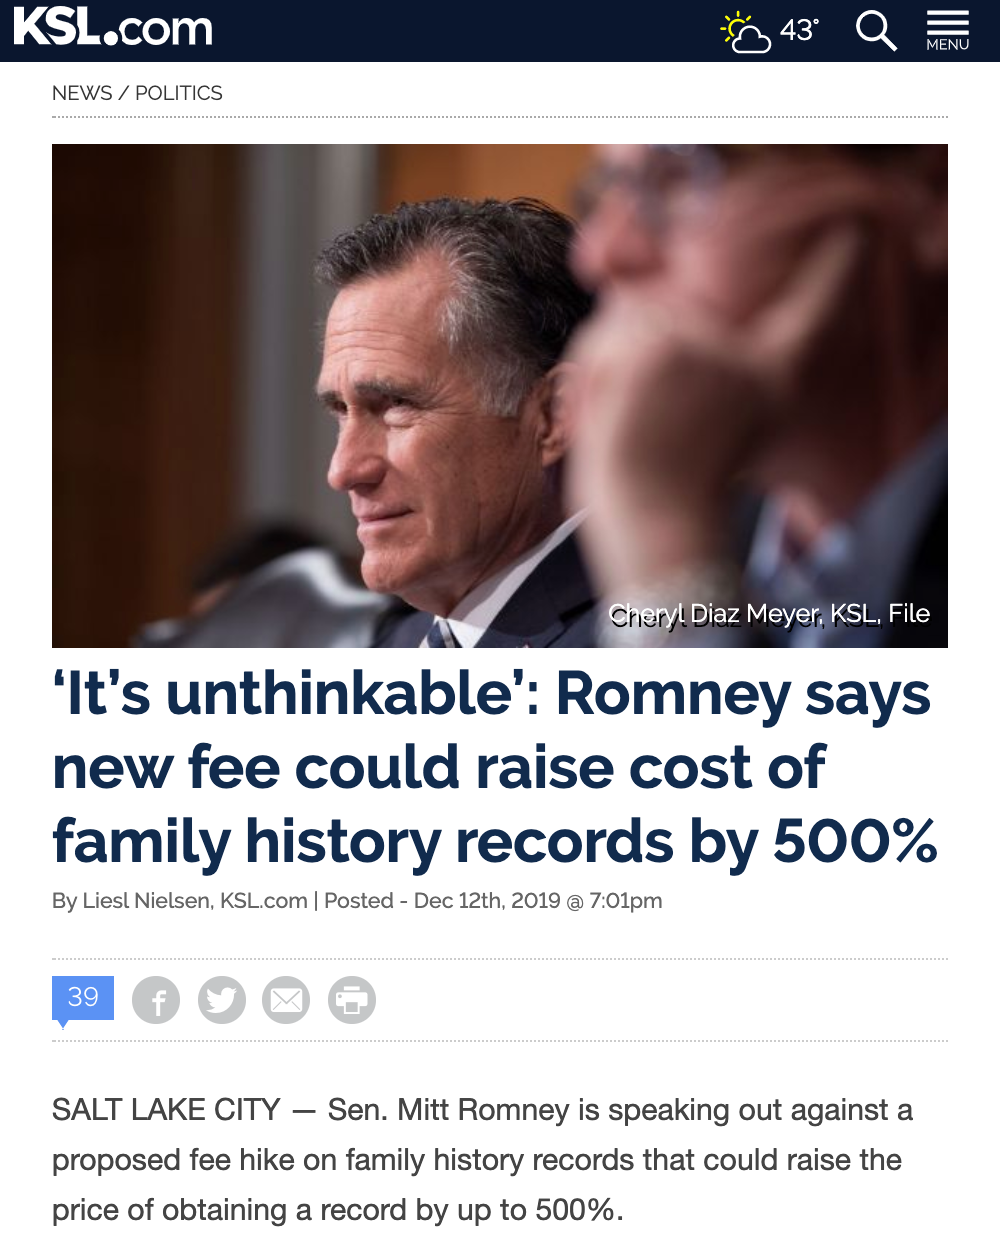 ‘It’s unthinkable’: Romney says new fee could raise cost of family history records by 500%